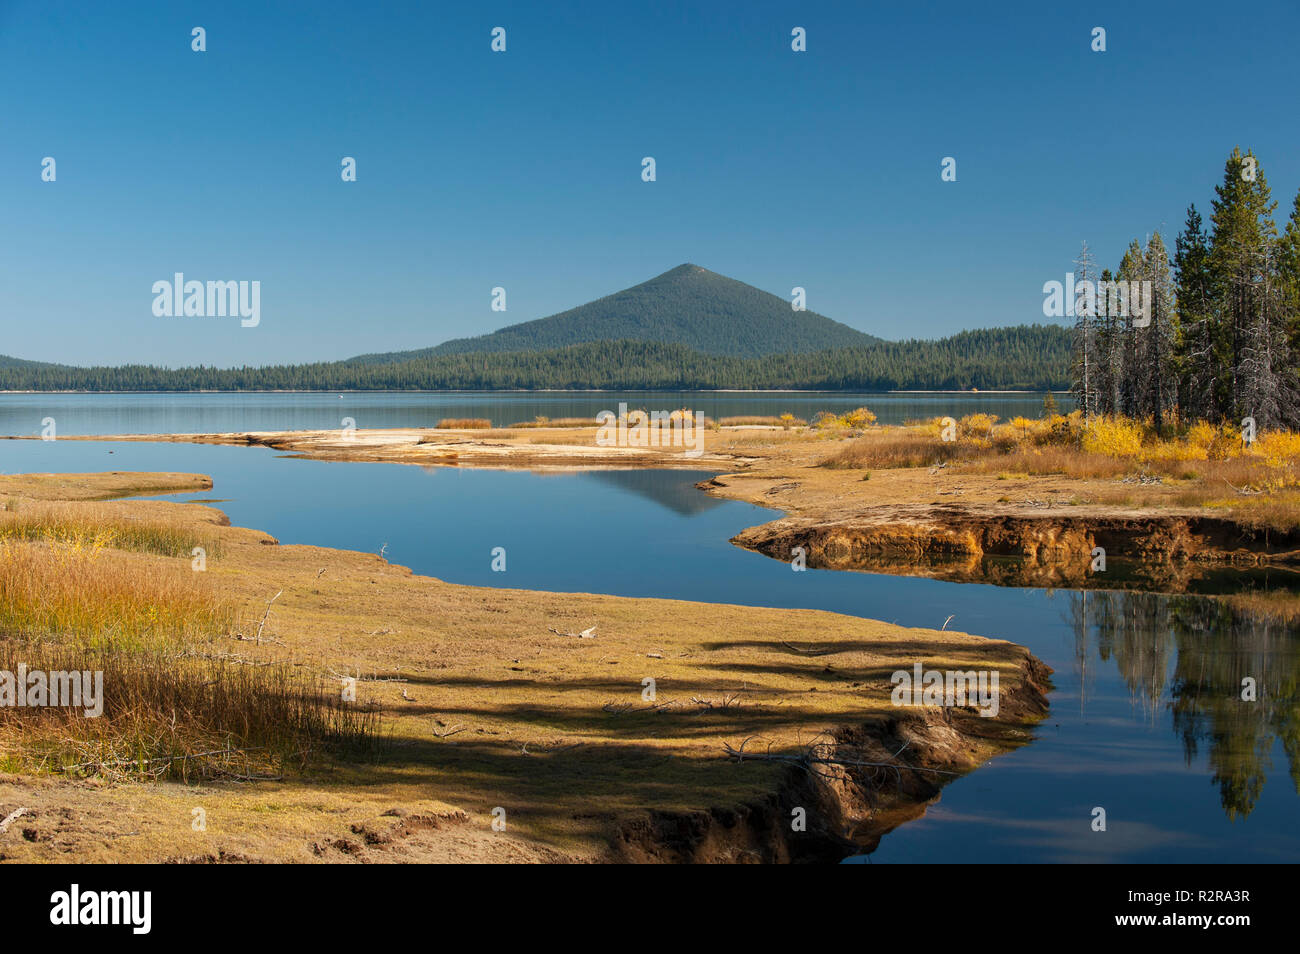 Odell Butte, a cinder cone, rises above Crescent Lake in Oregon's Cascade Lakes area. Stock Photo